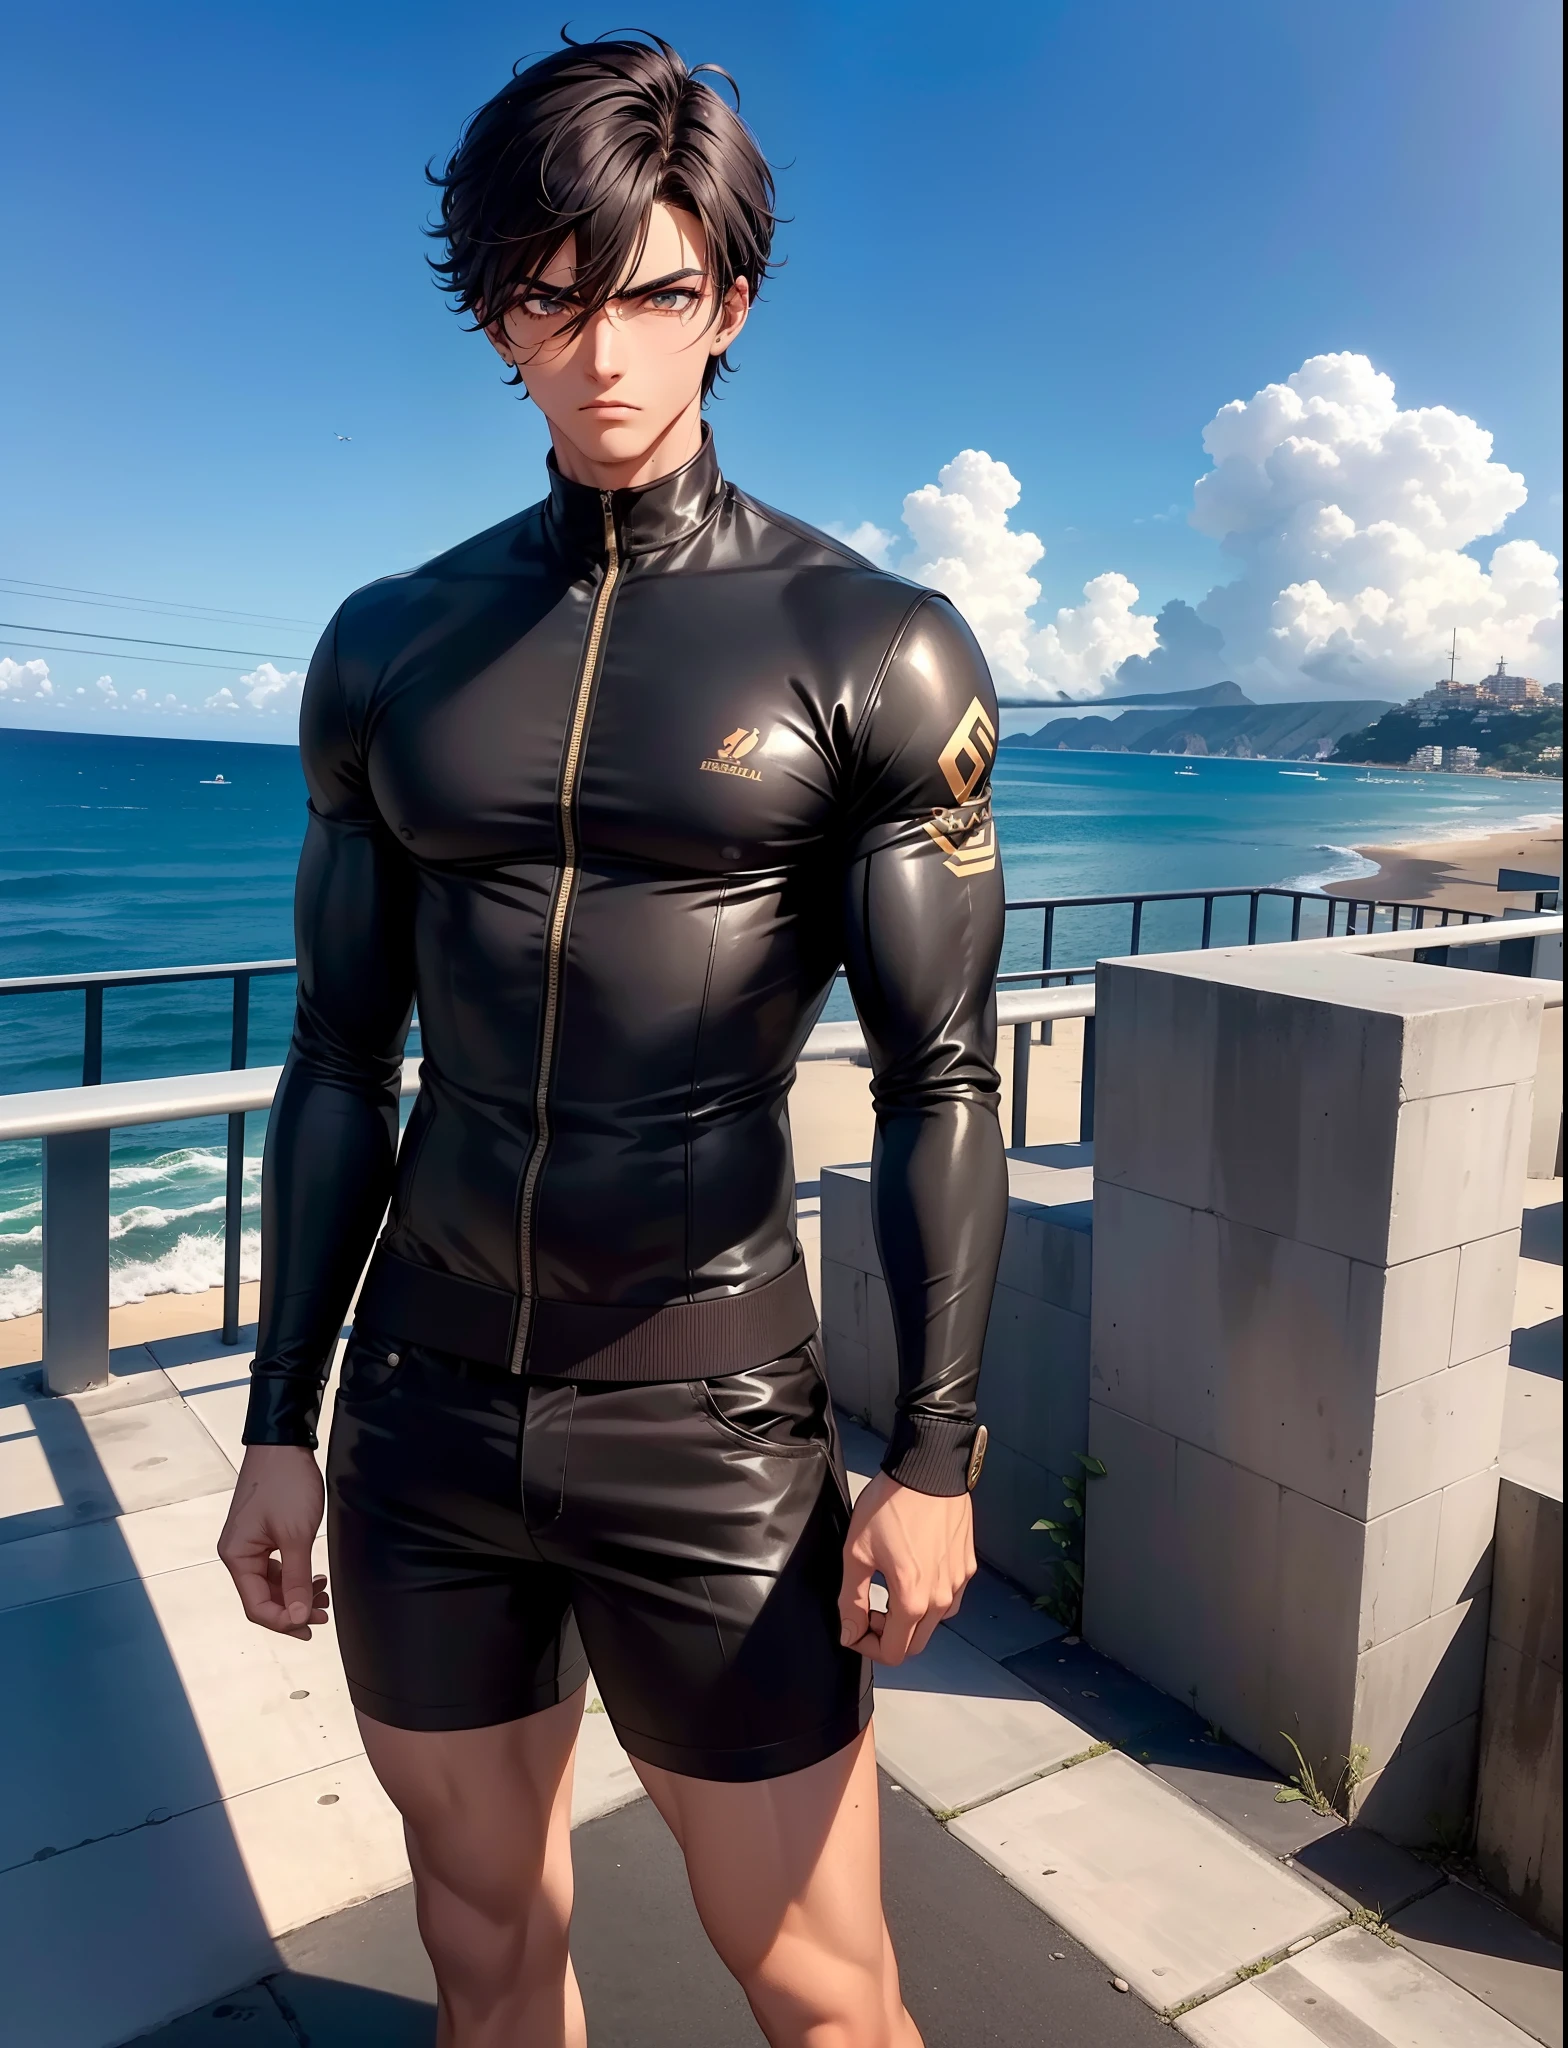 Original character, masculine, Cao Cao, Scrawny, age 17 years, black short hair, Brown eyes, Caucasian skin, city in the background of the image, face expression, best qualityer, 8k, ultra HD, ((wearing school clothes)), angry facial expression